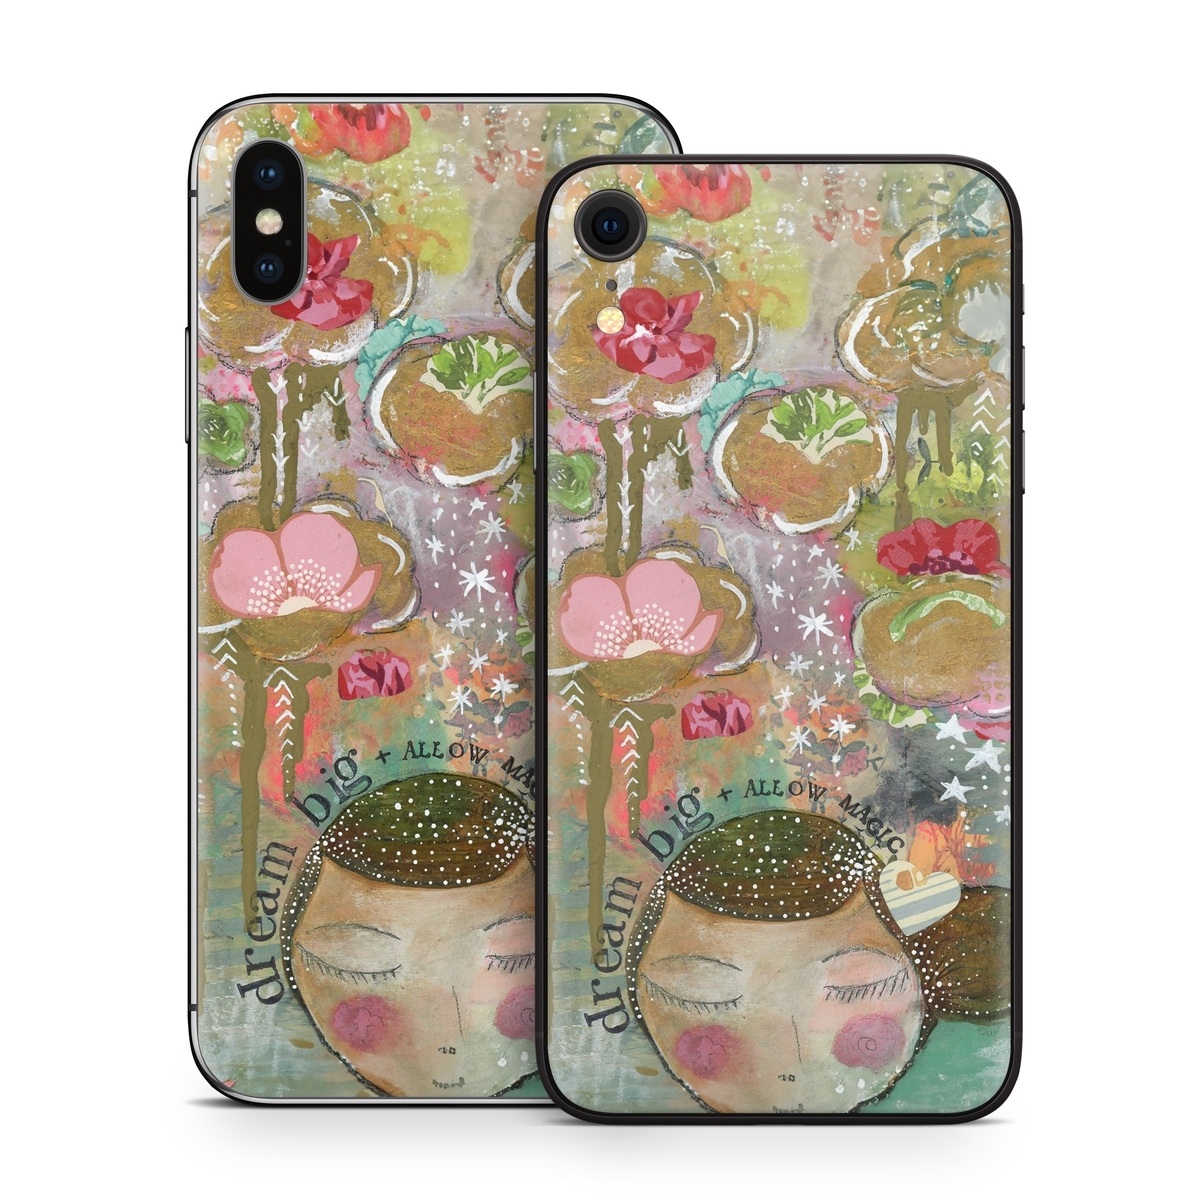 iPhone XS Skin design of Painting, Pink, Illustration, Art, Child art, Watercolor paint, Drawing, Visual arts, Still life, with brown, pink, red, green, white, black, orange, gray colors